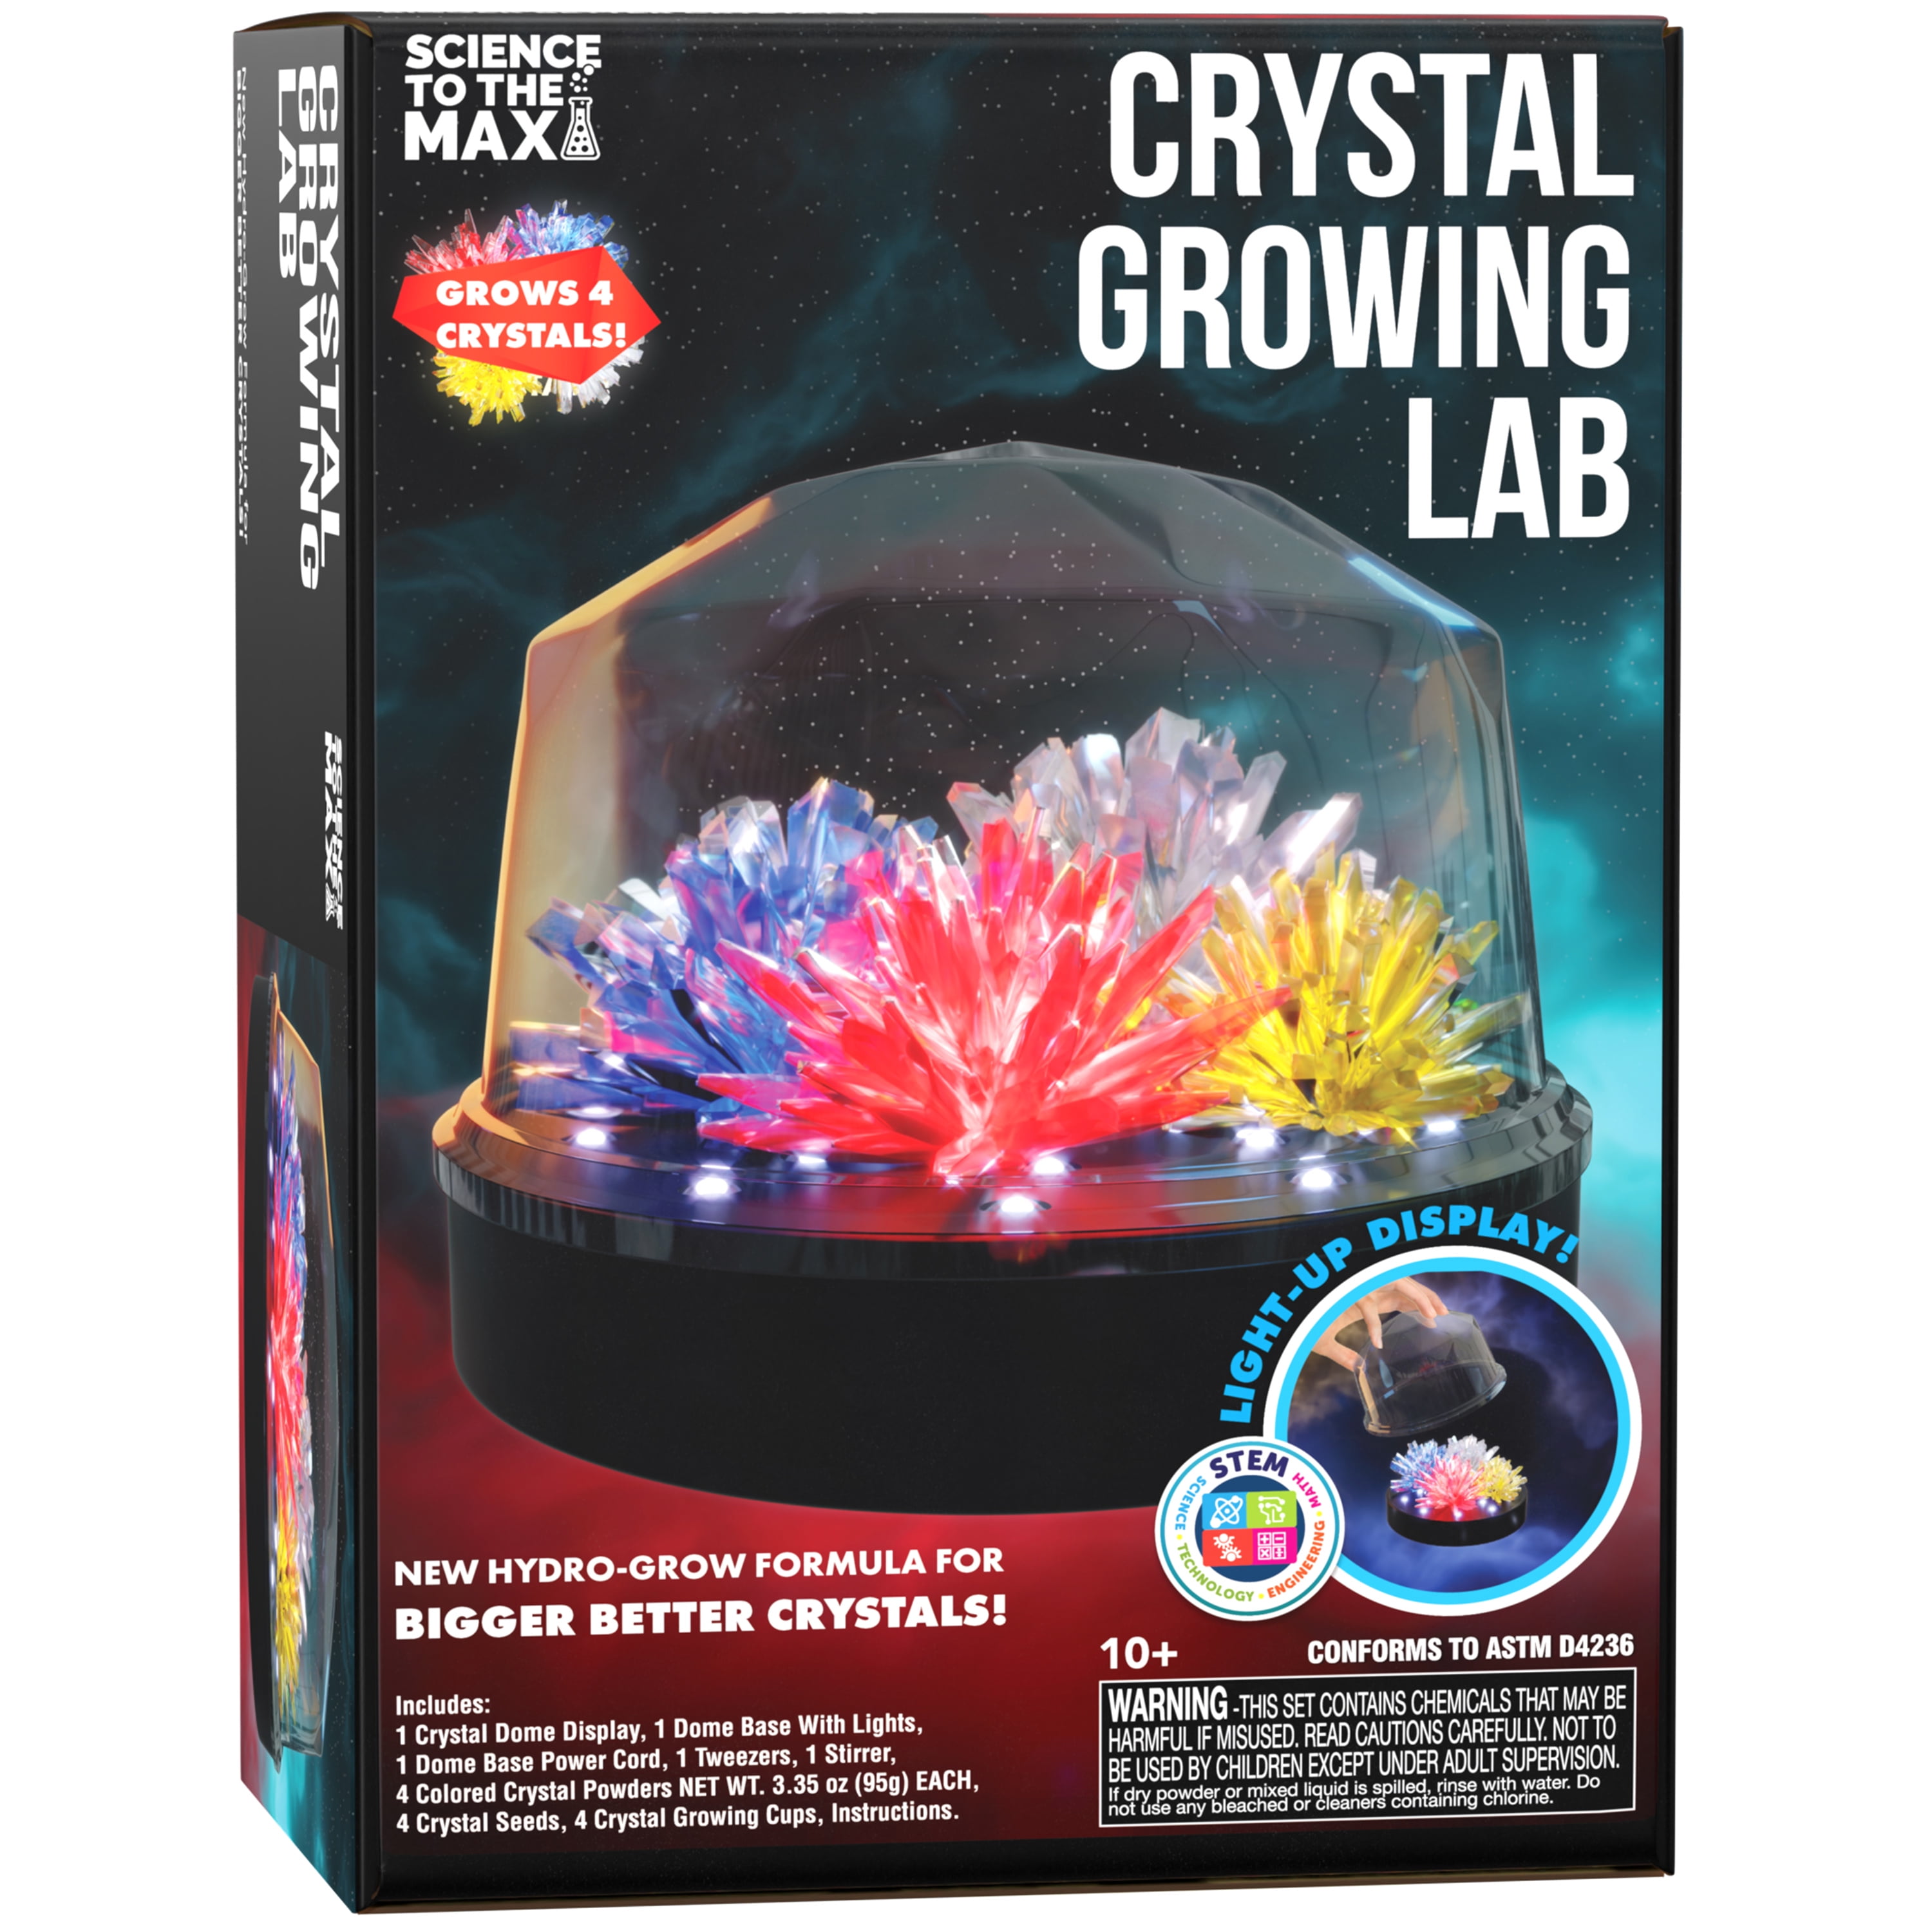 A Brighter Child - Smithsonian Crystal Growing Kit (10 Crystals) - Hands-On  Science Kits